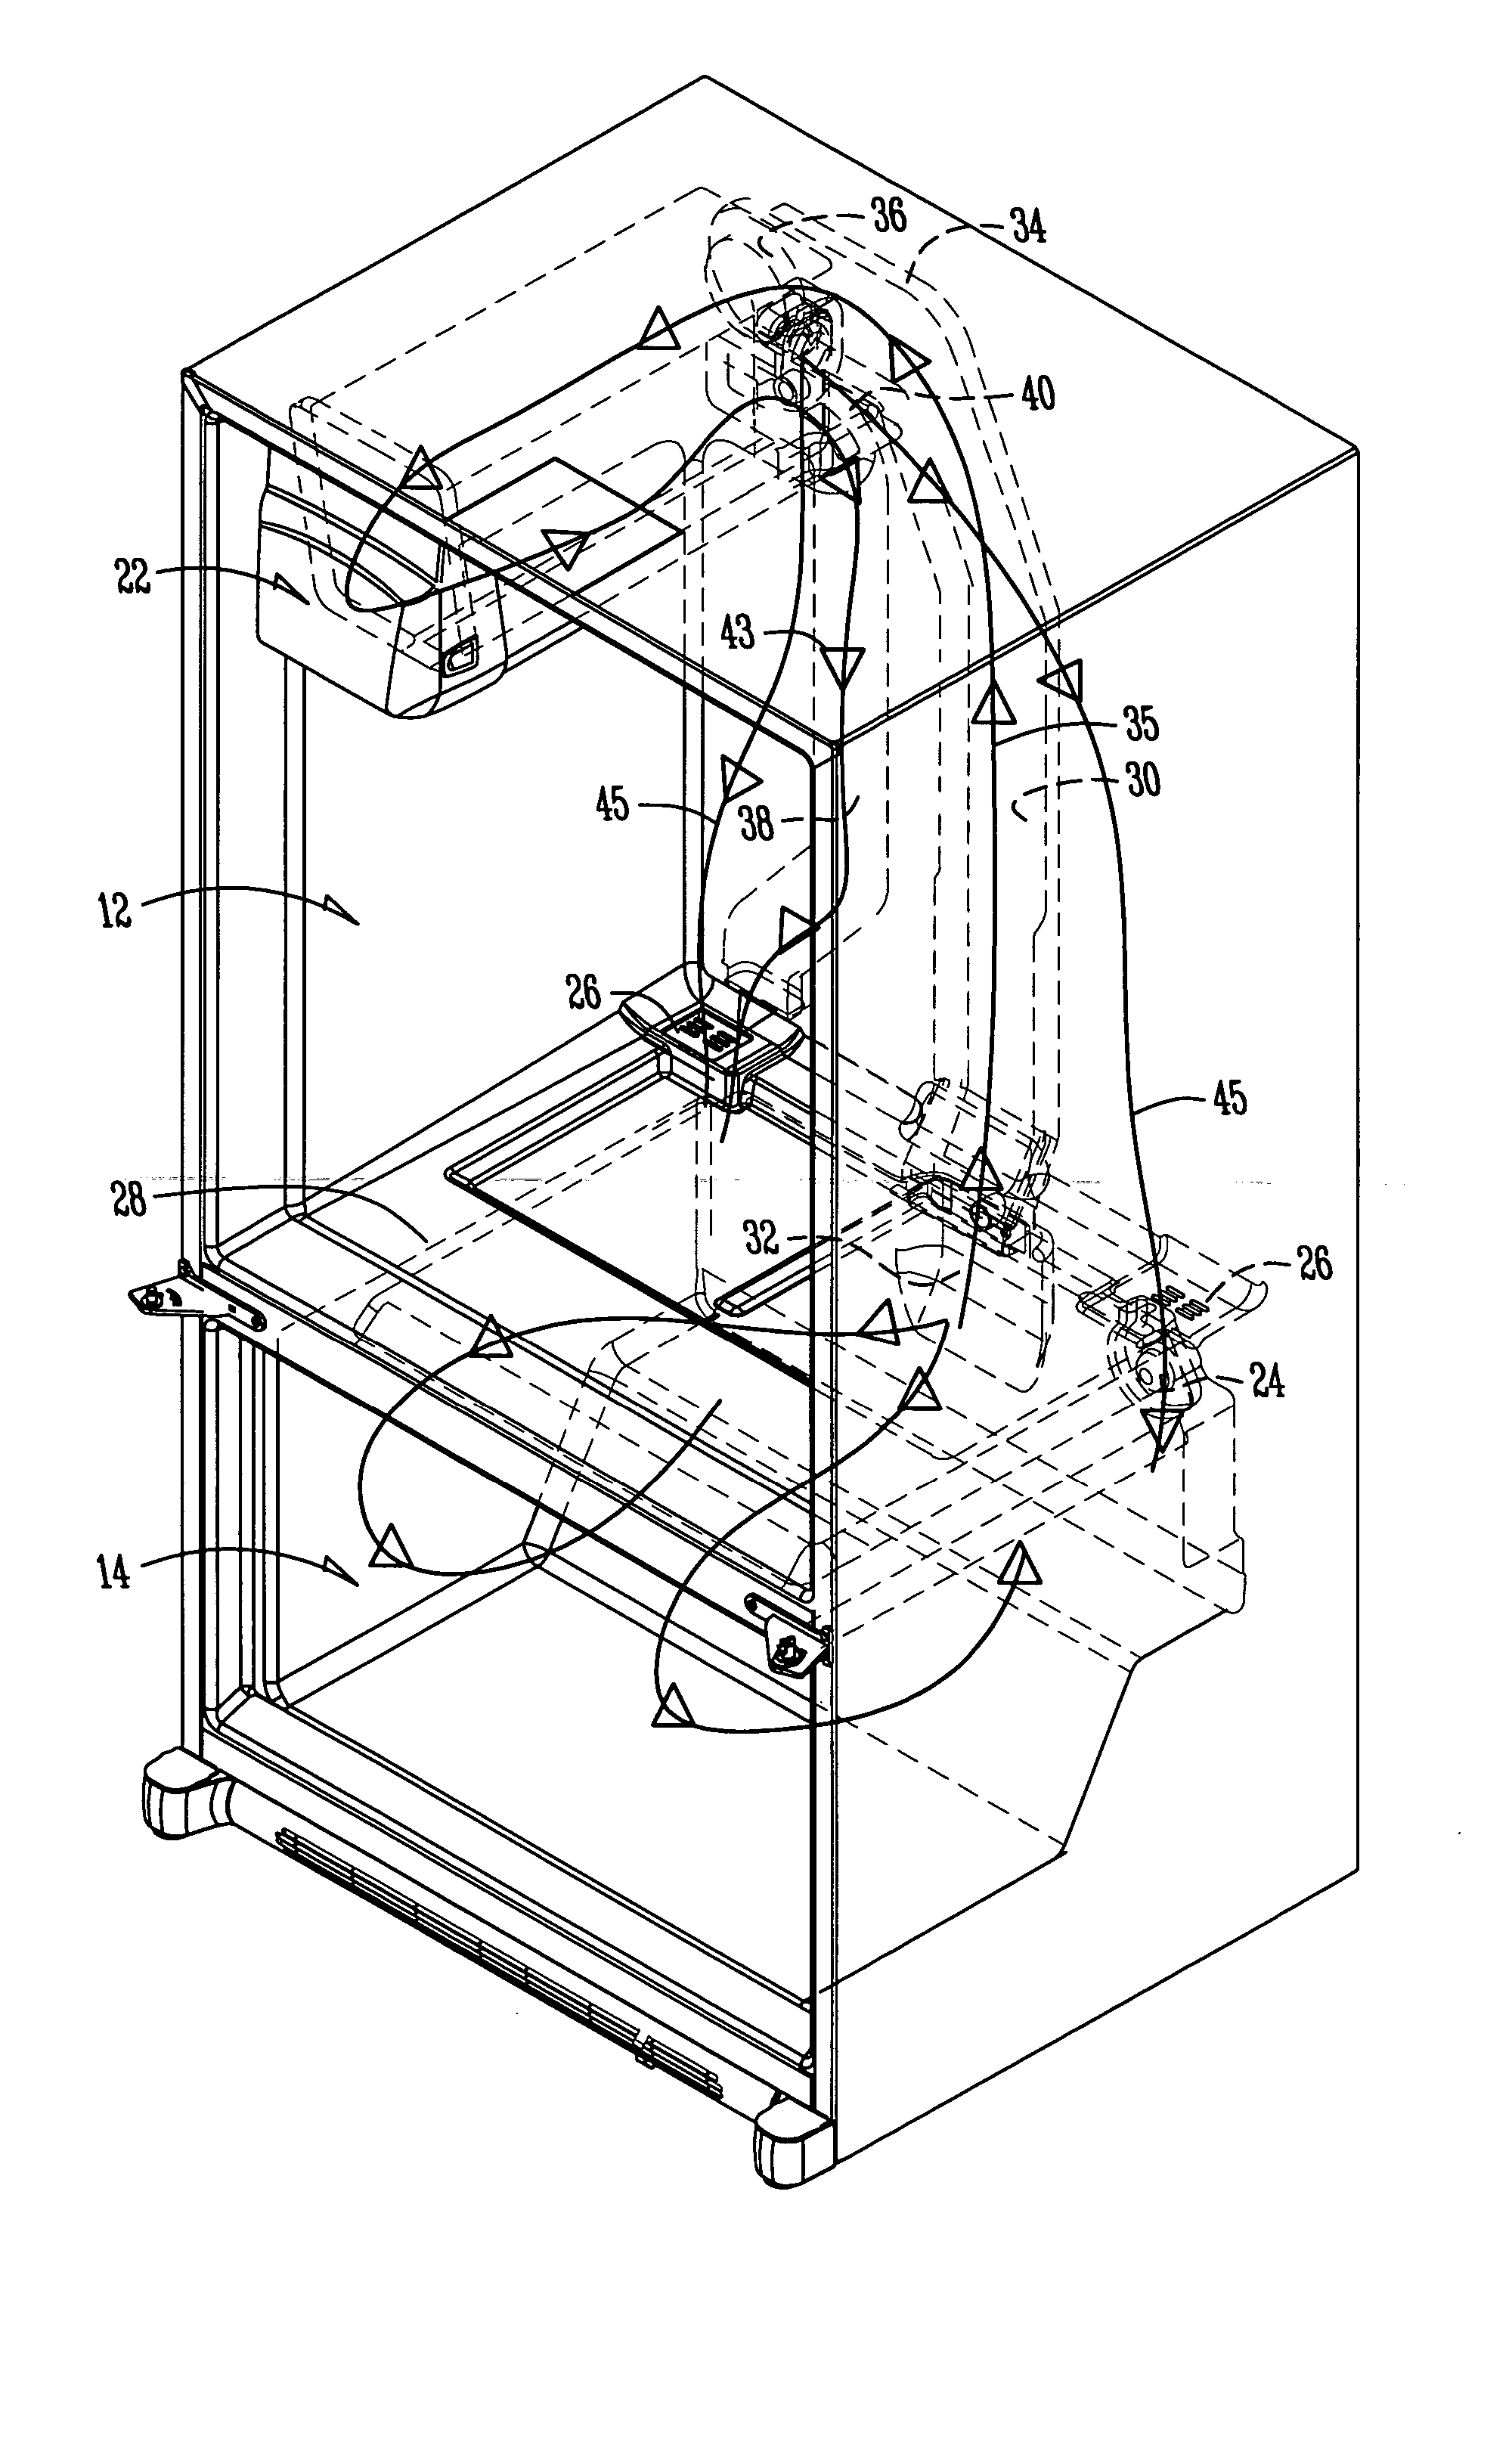 Insulated ice compartment for bottom mount refrigerator